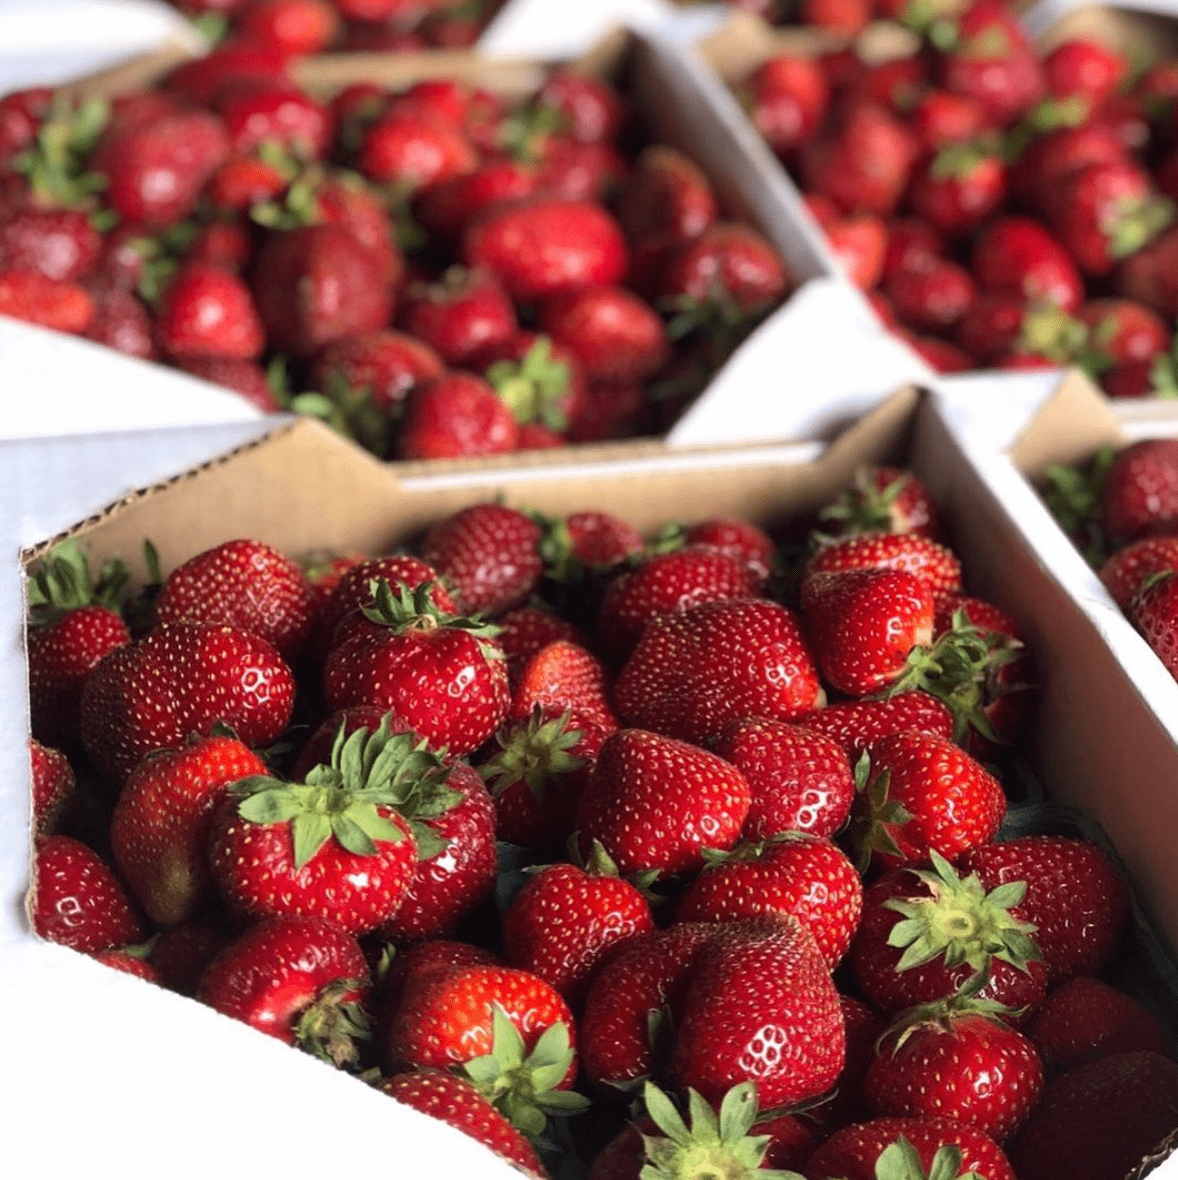 strawberry picking in nj, fruit picking in New Jersey